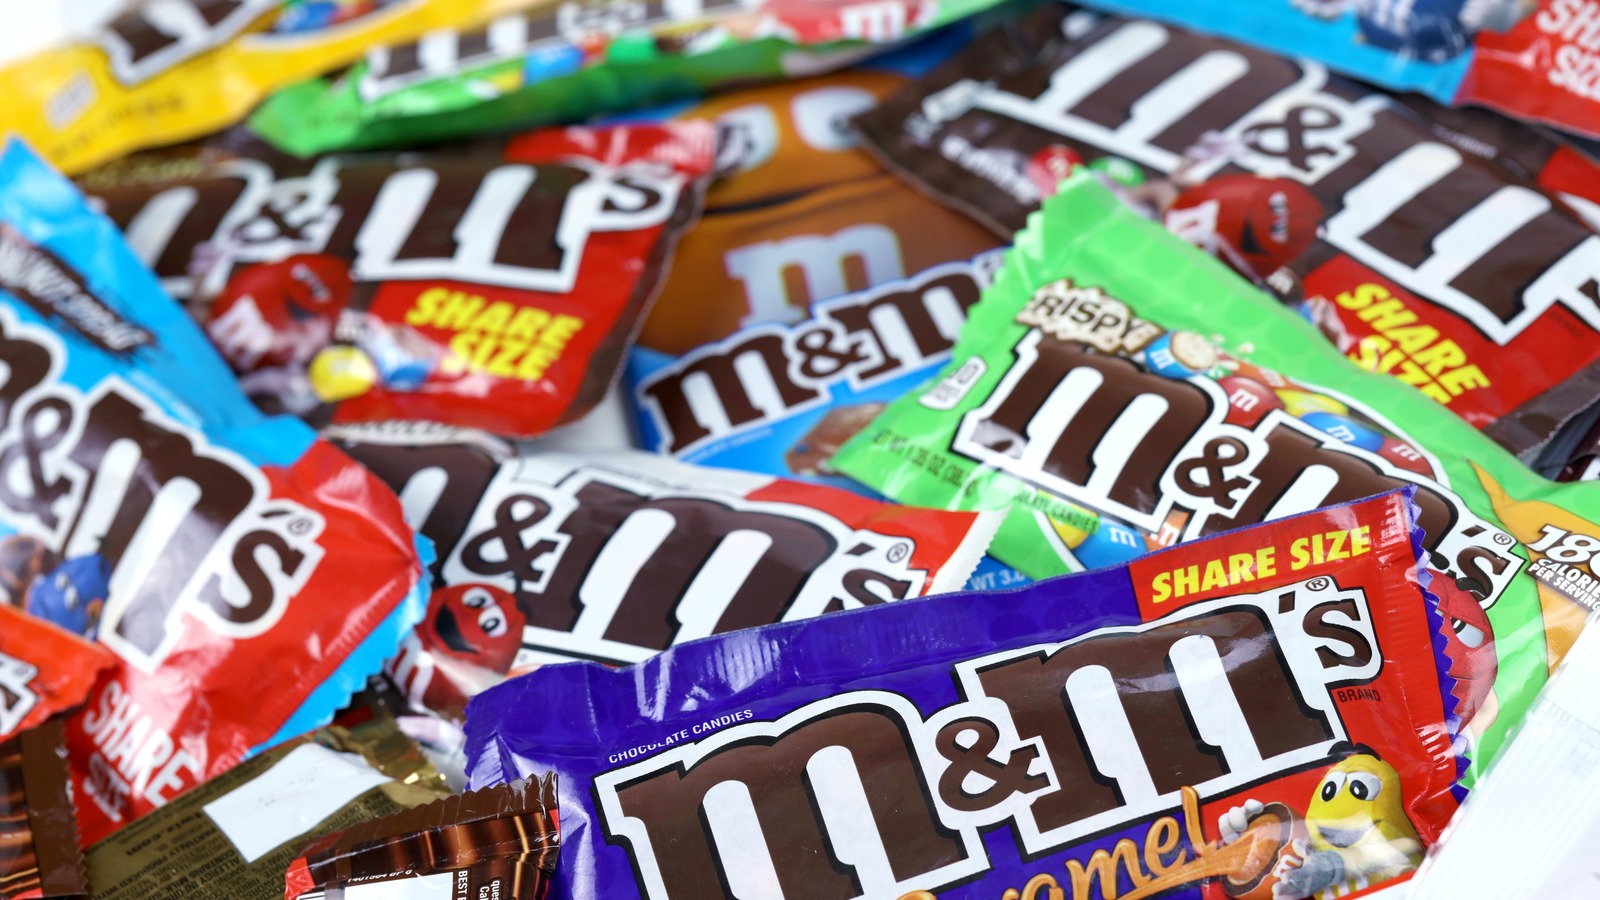 REVIEW: White Chocolate Marshmallow Crispy Treat M&M's - The